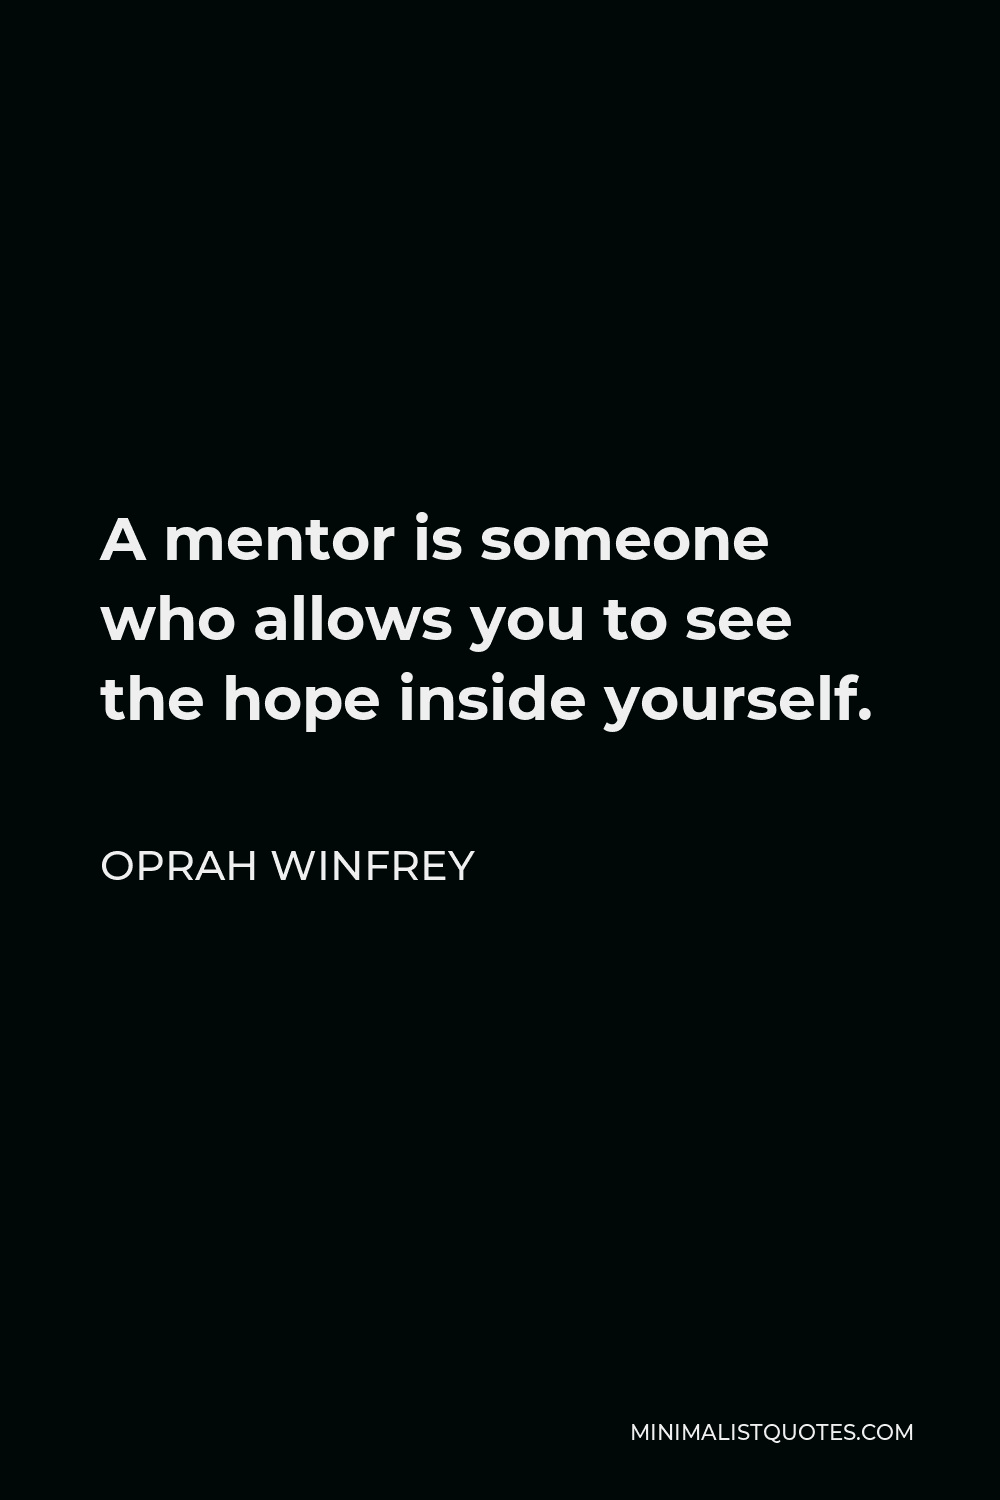 Oprah Winfrey Quote: A mentor is someone who allows you to see the inside yourself.